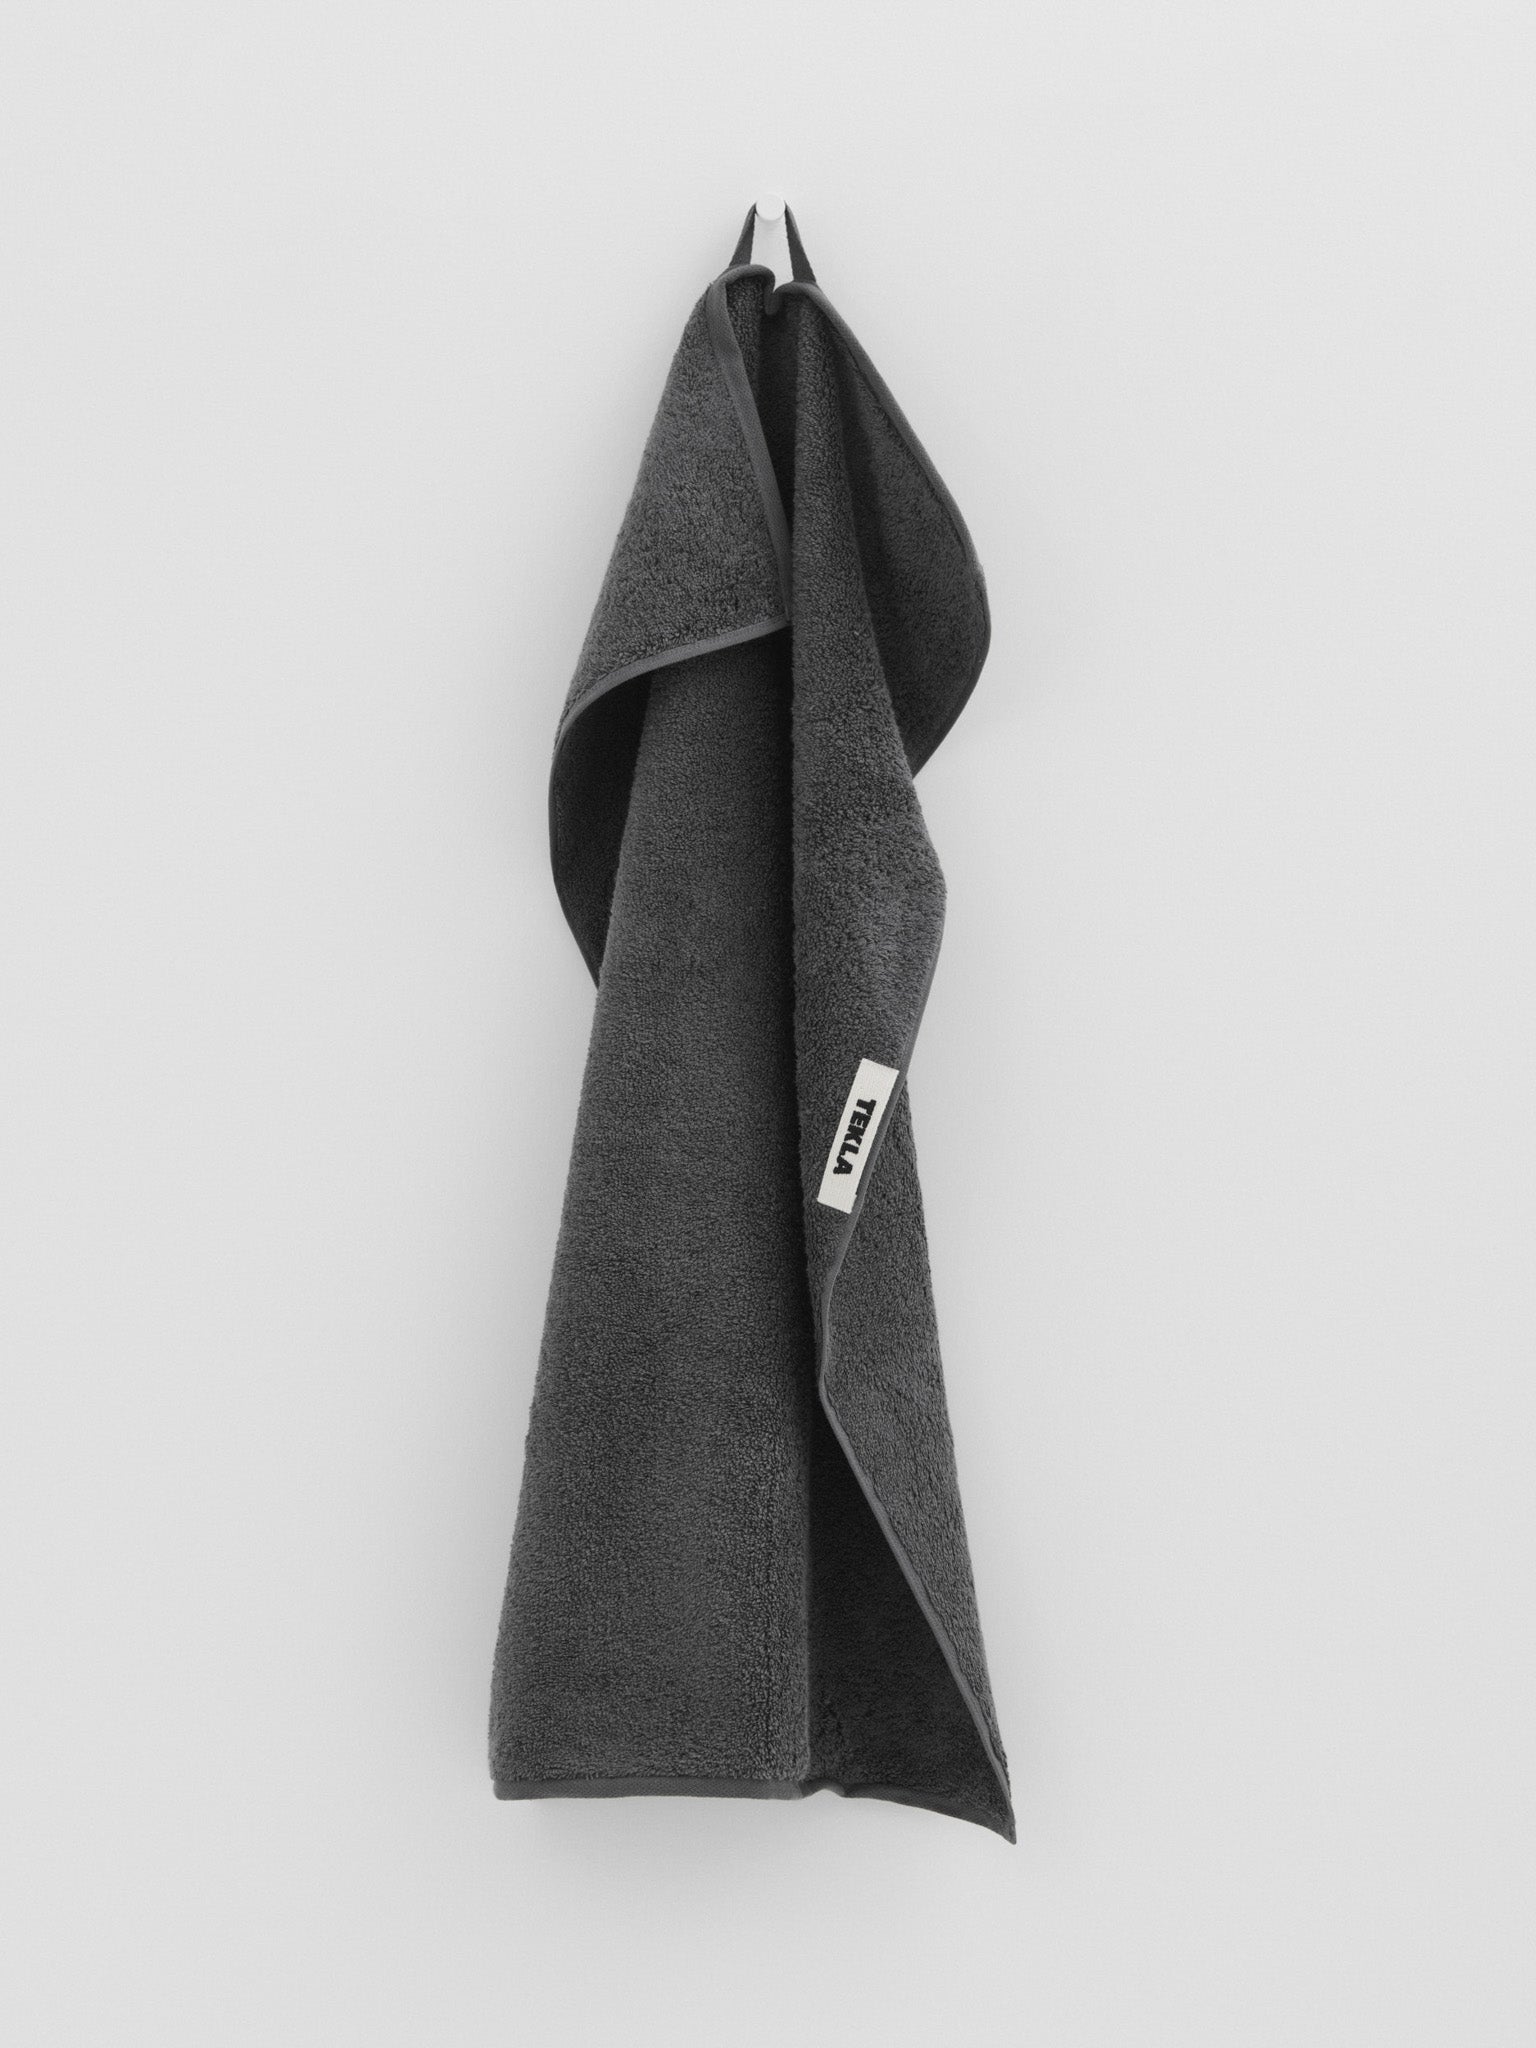 Hand Towel in Charcoal Grey